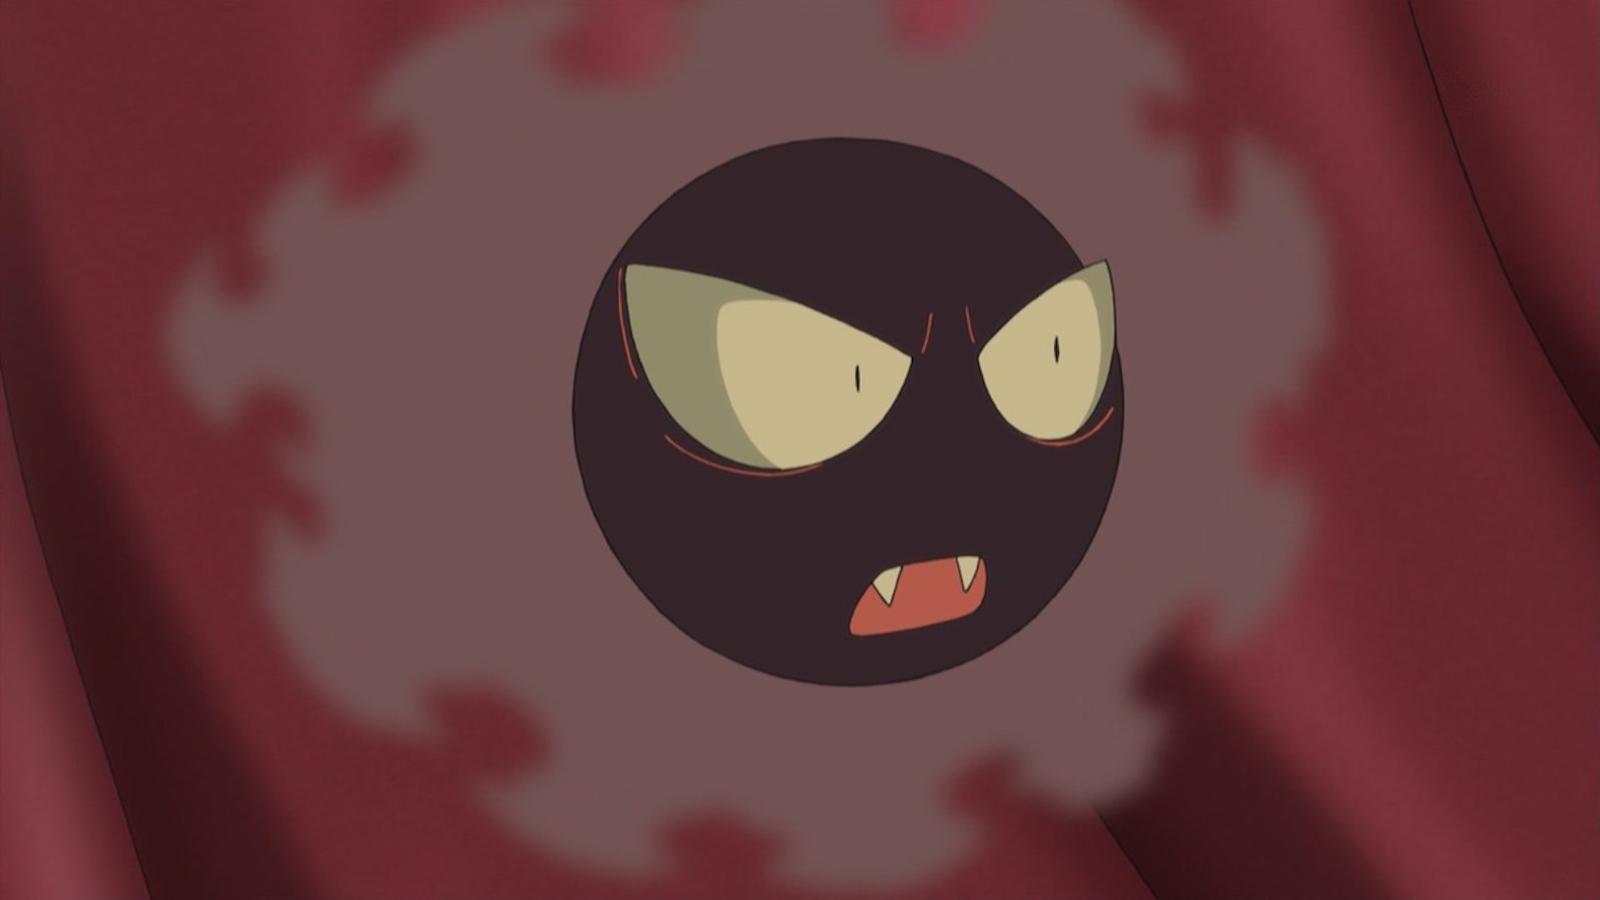 Gastly from Pokemon anime looking surpirsed.